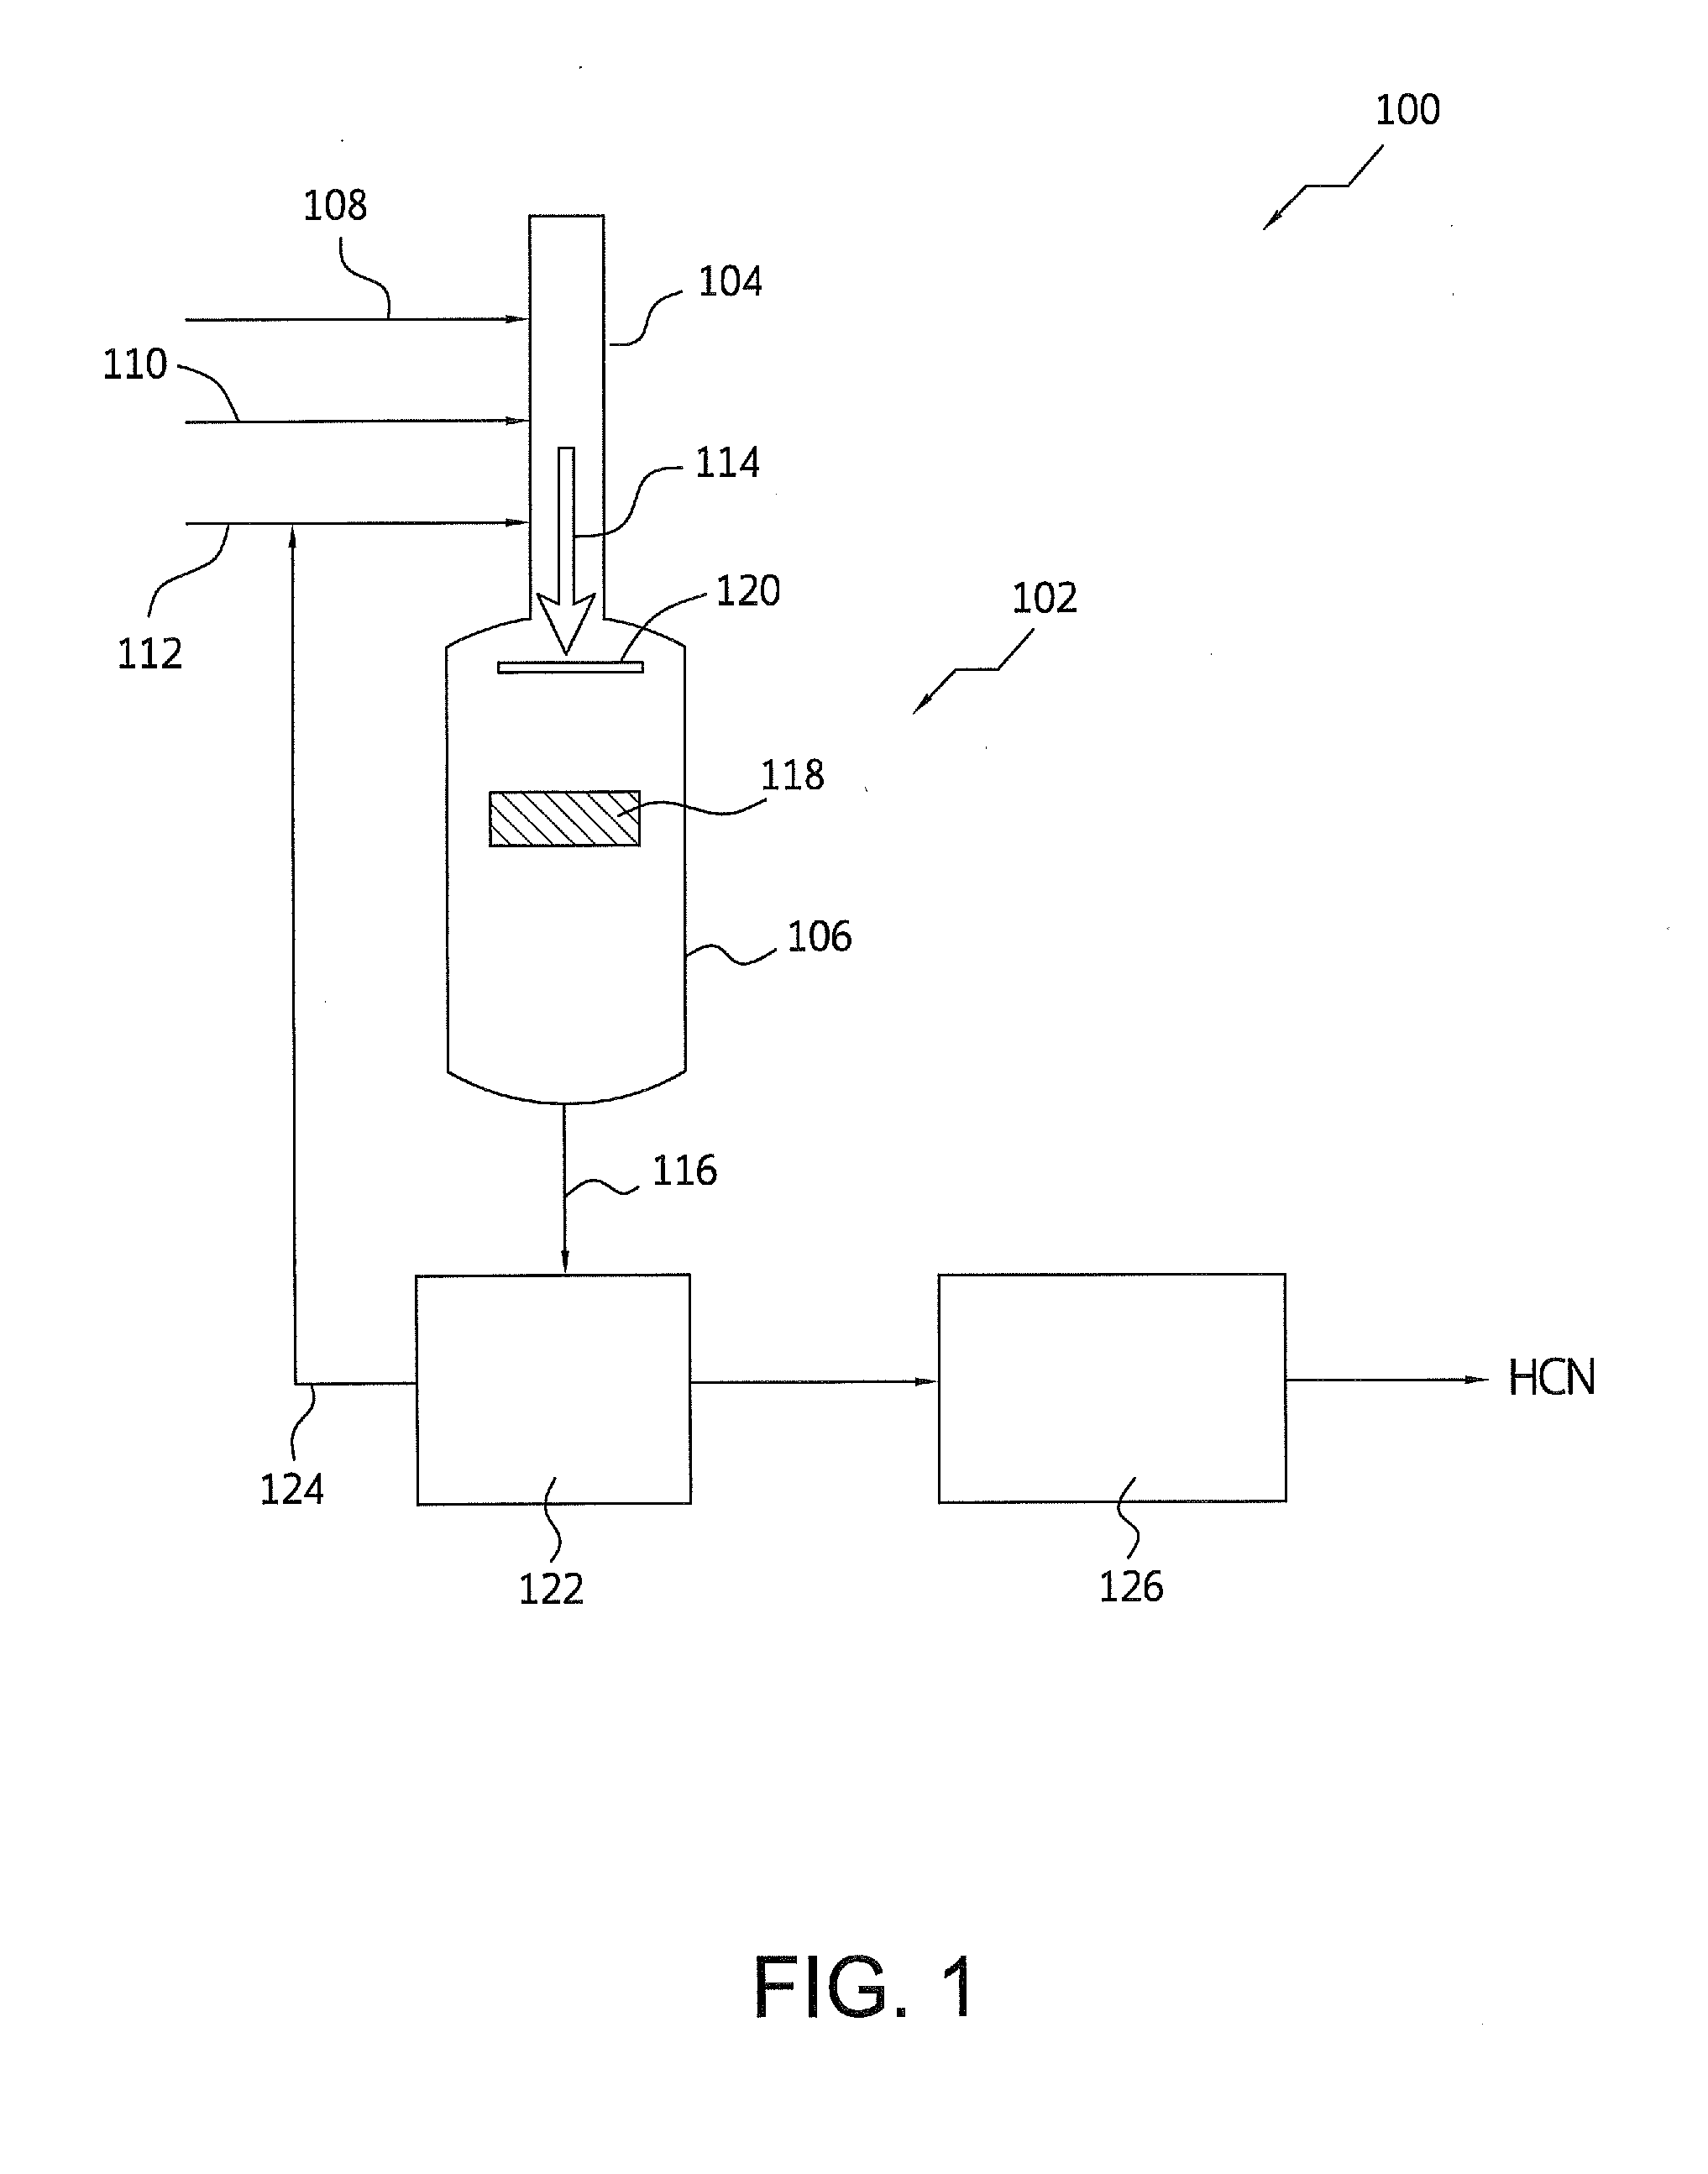 Processes for producing hydrogen cyanide using static mixer